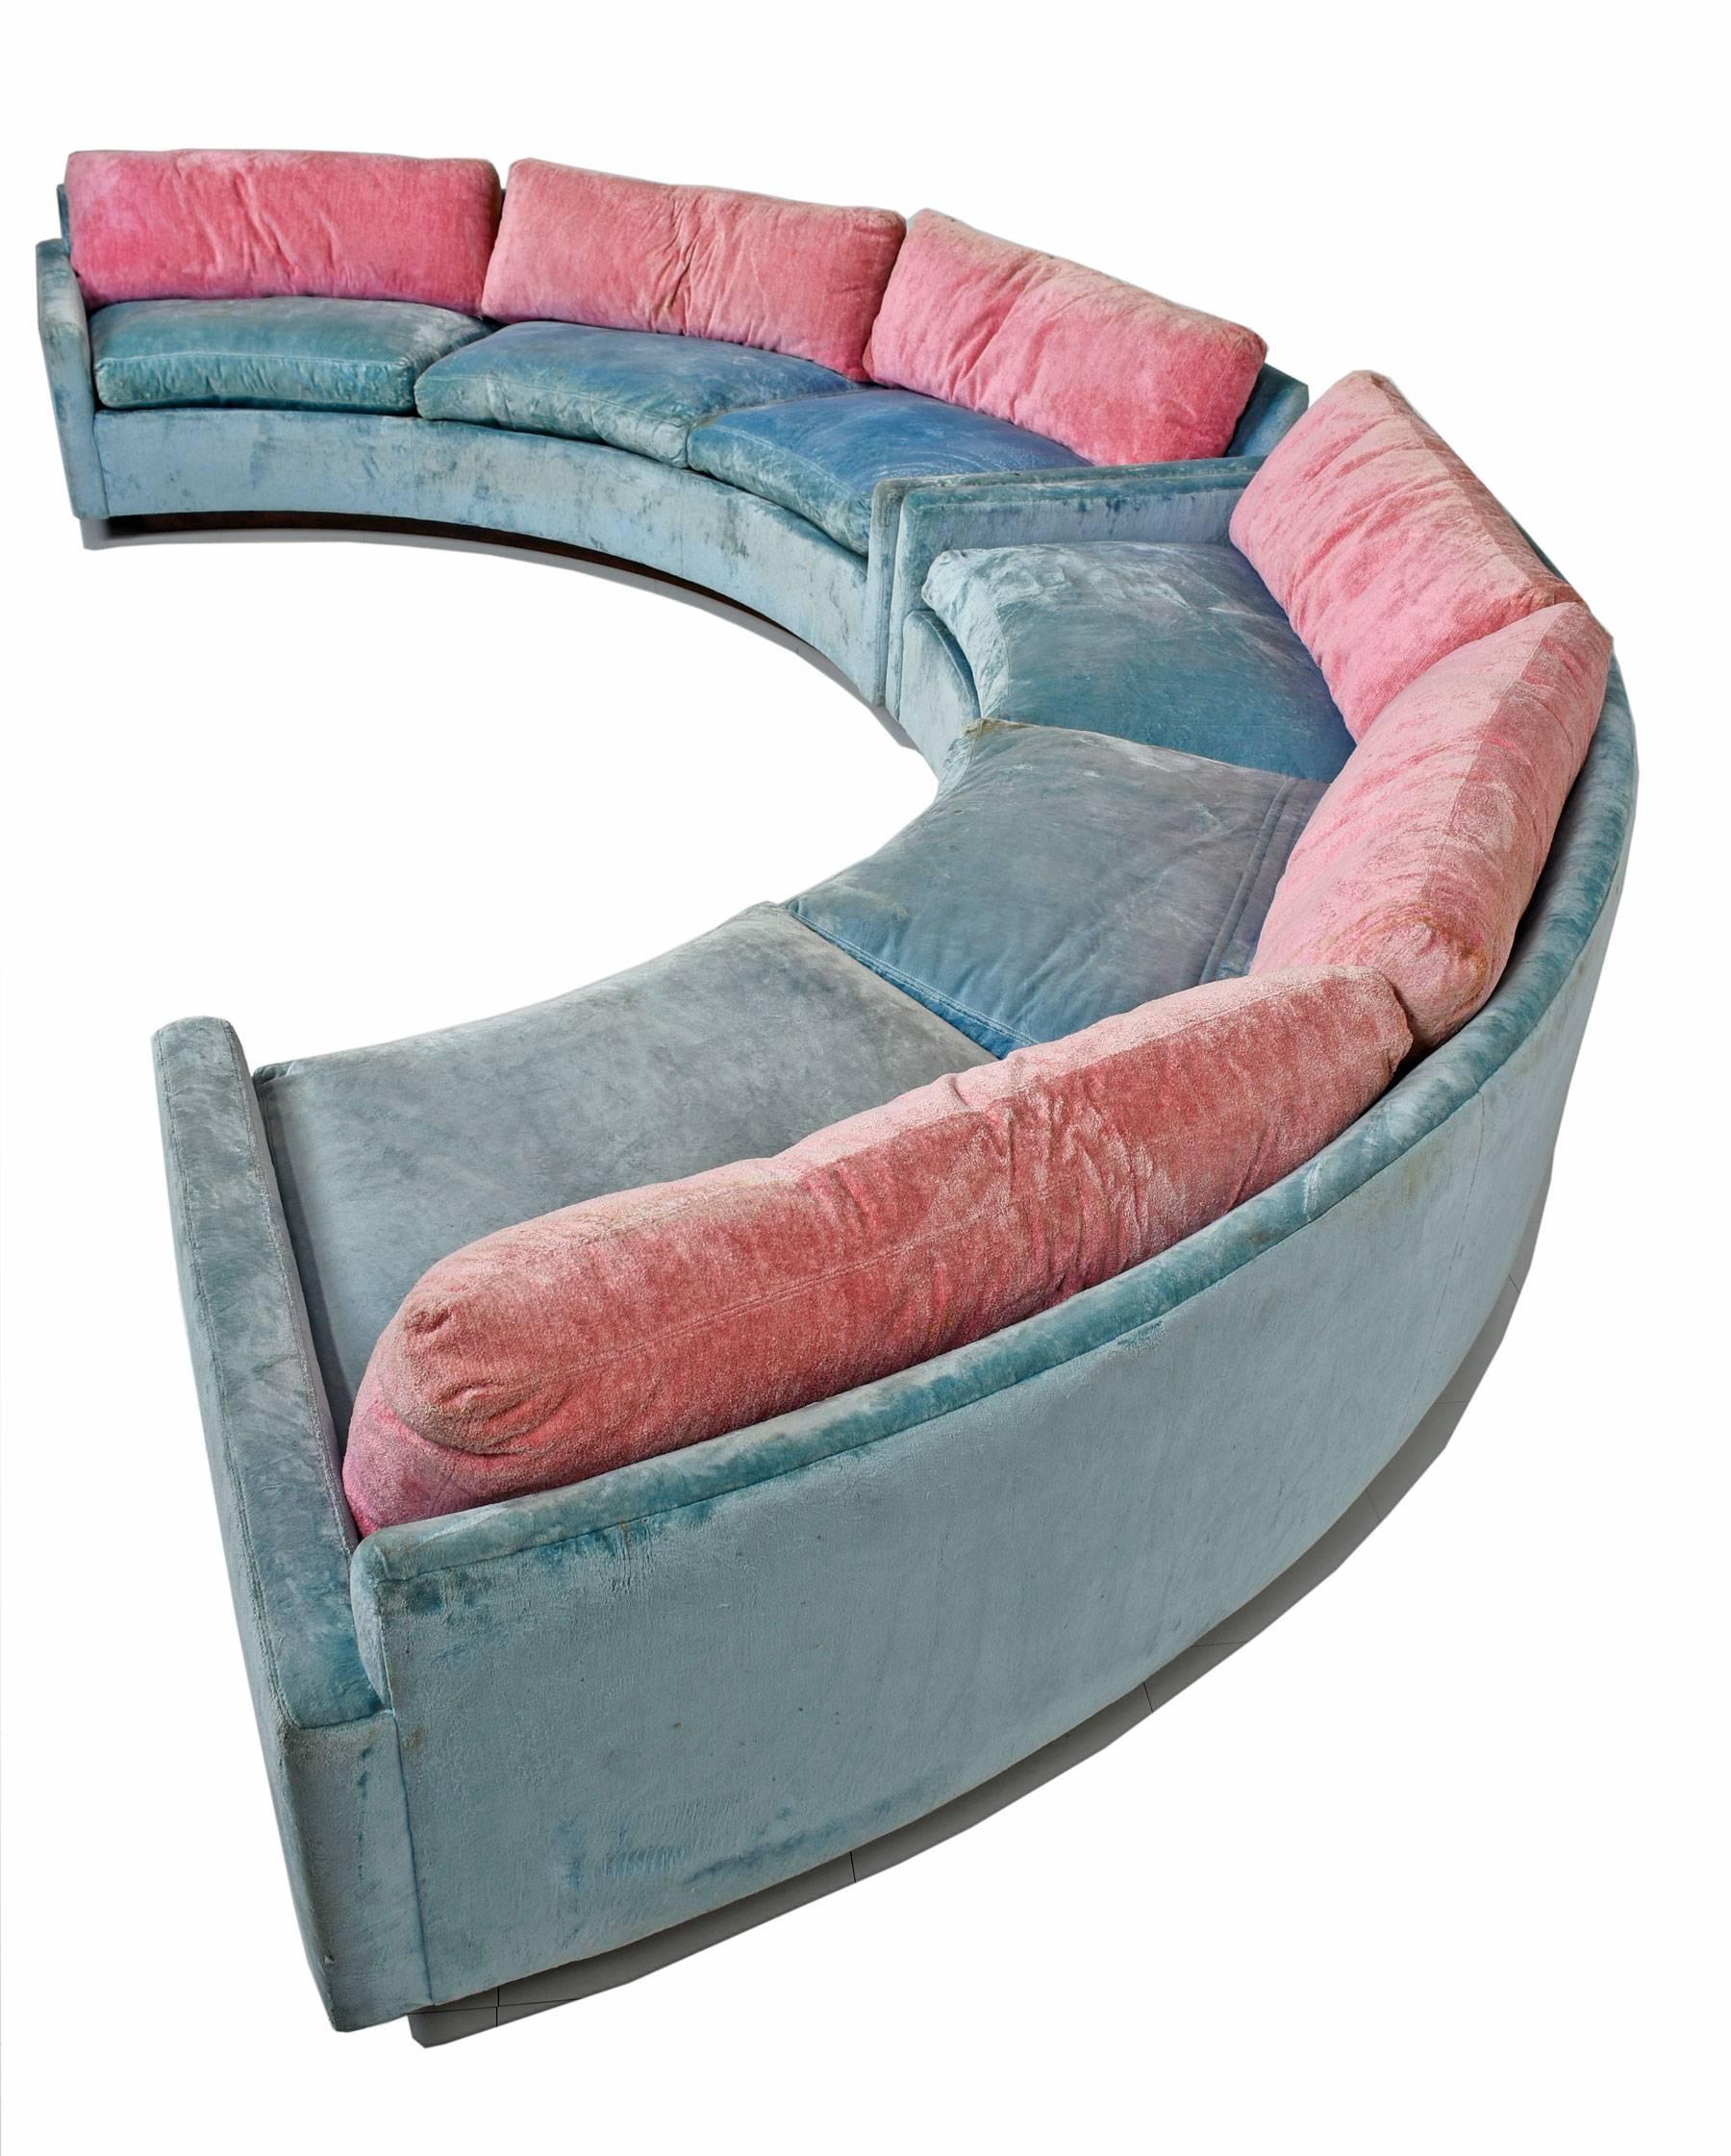 Mid Century Modern semi-circular sectional sofa designed by Milo Baughman for Thayer Coggin, circa 1970s. This sectional consists of two curved low profile sofas, each with arms at both ends making it possible to use separately or joined together as